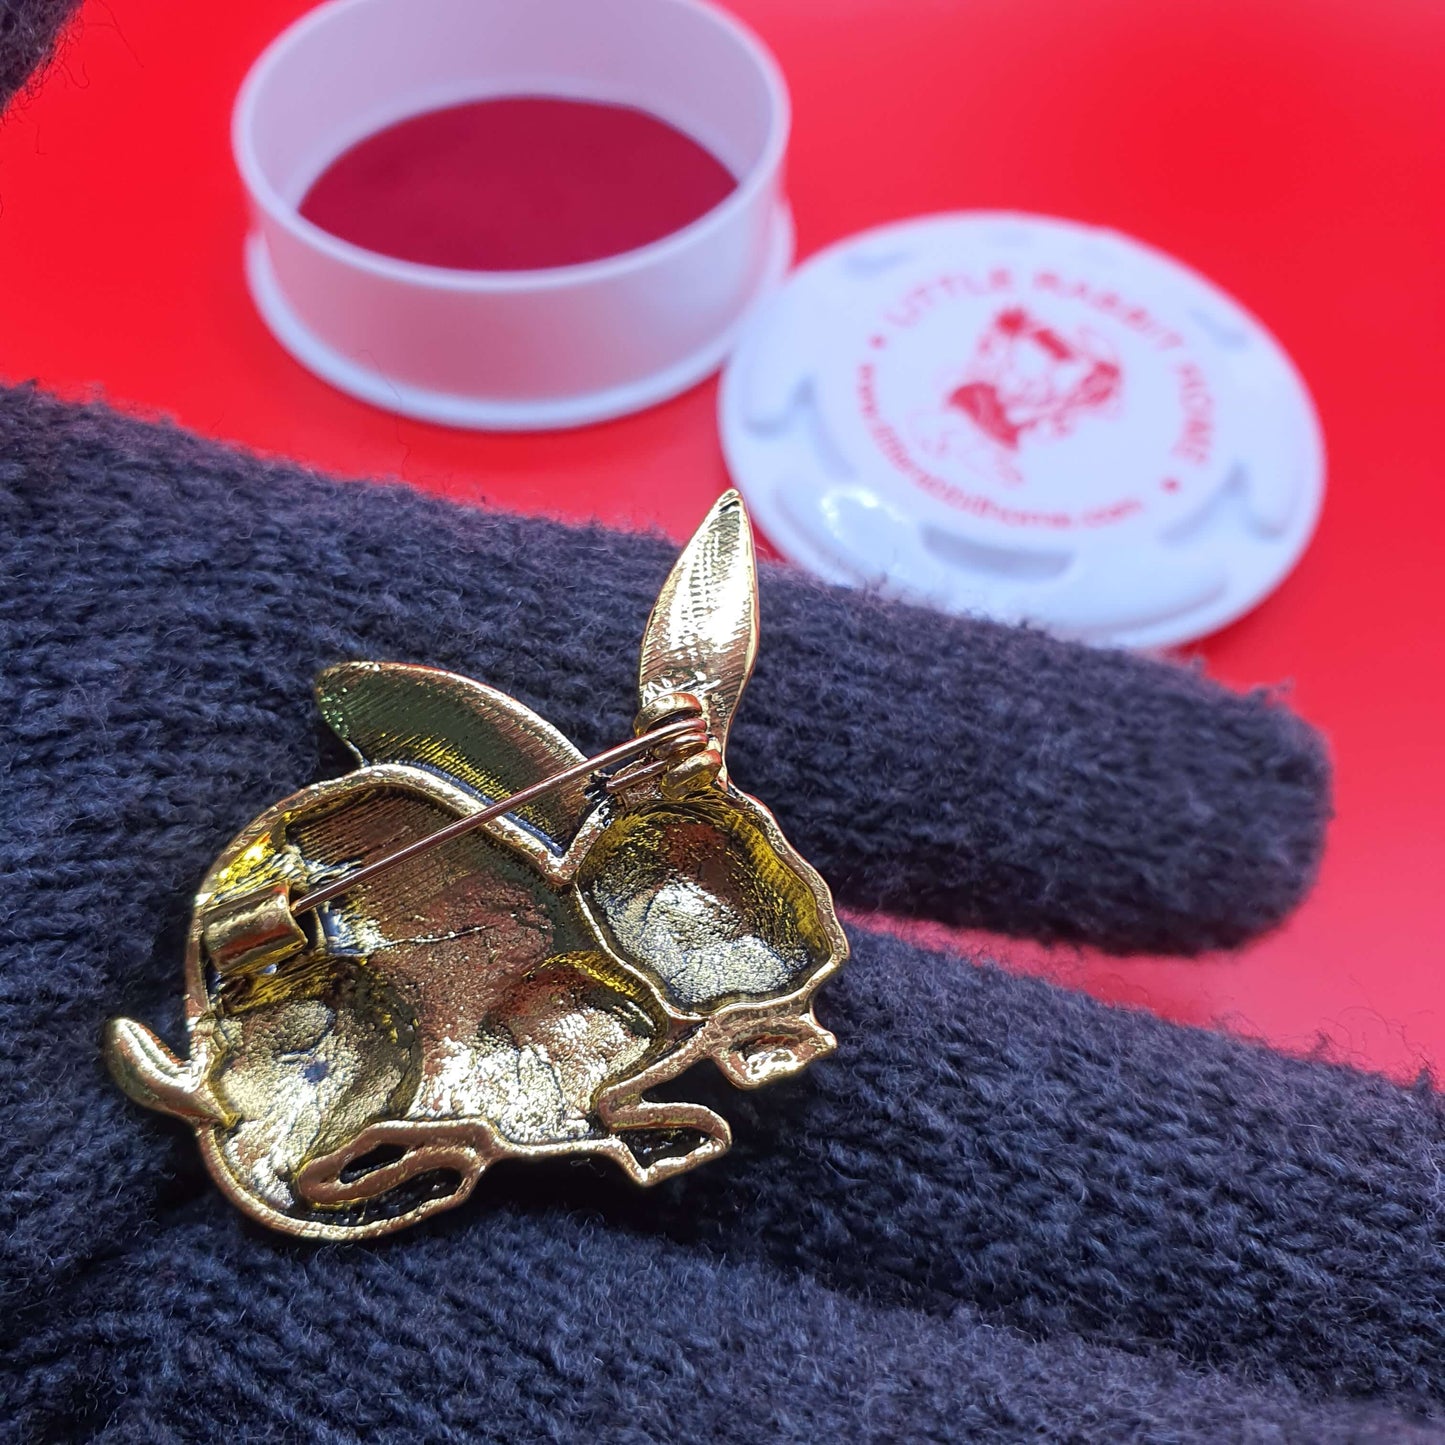 The Golden Bunny brooch (2pcs pack)